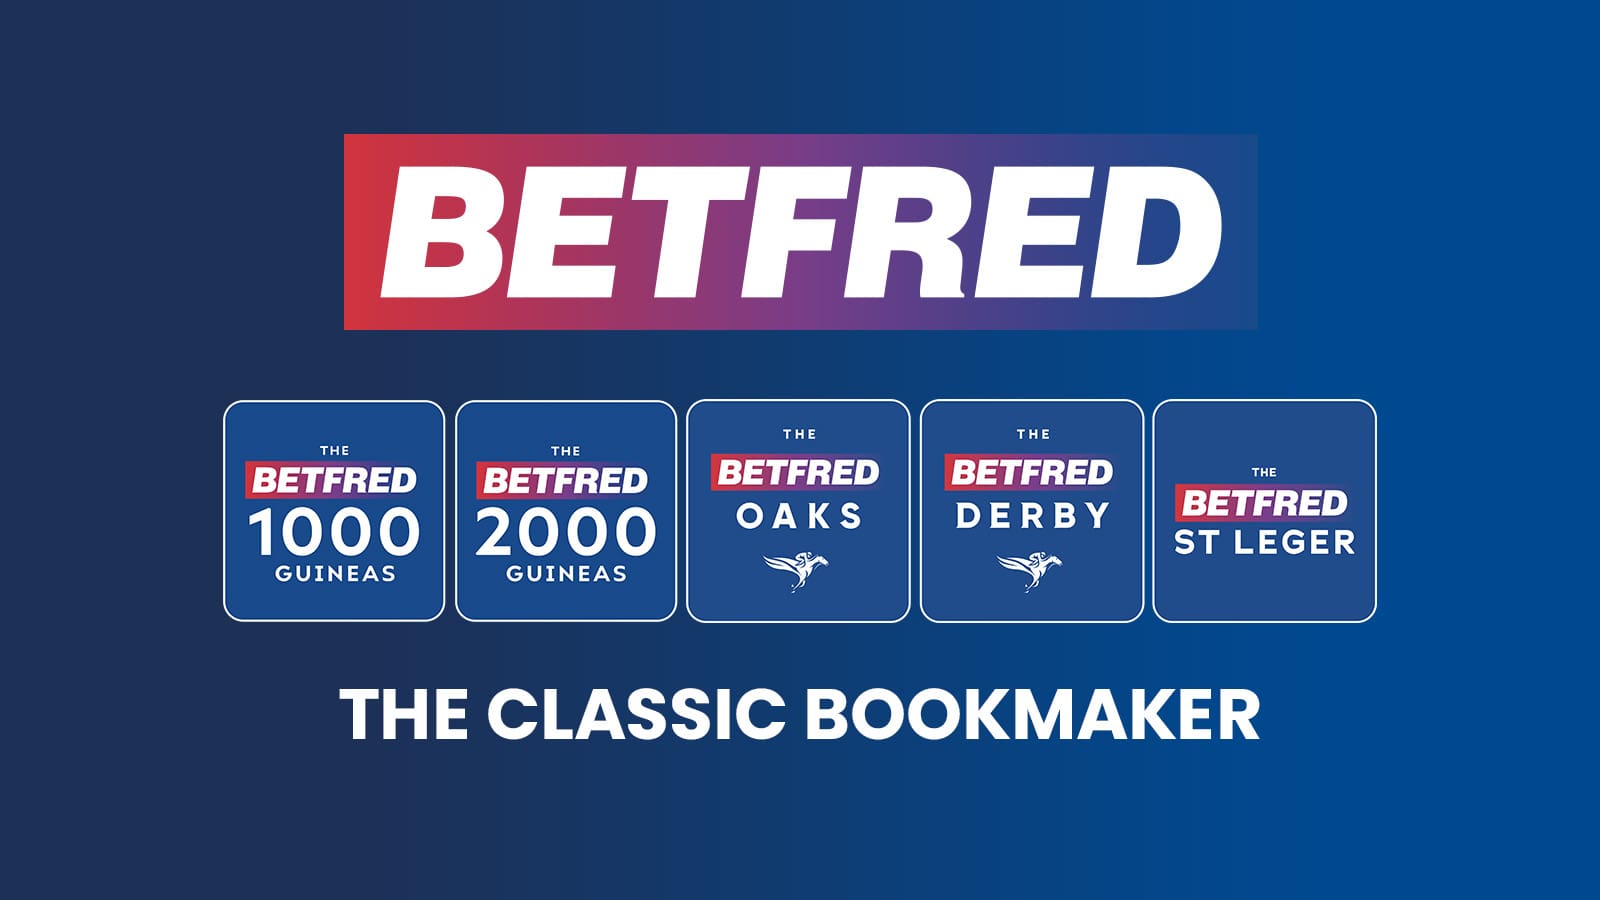 classic bookmaker_1600x900_insights